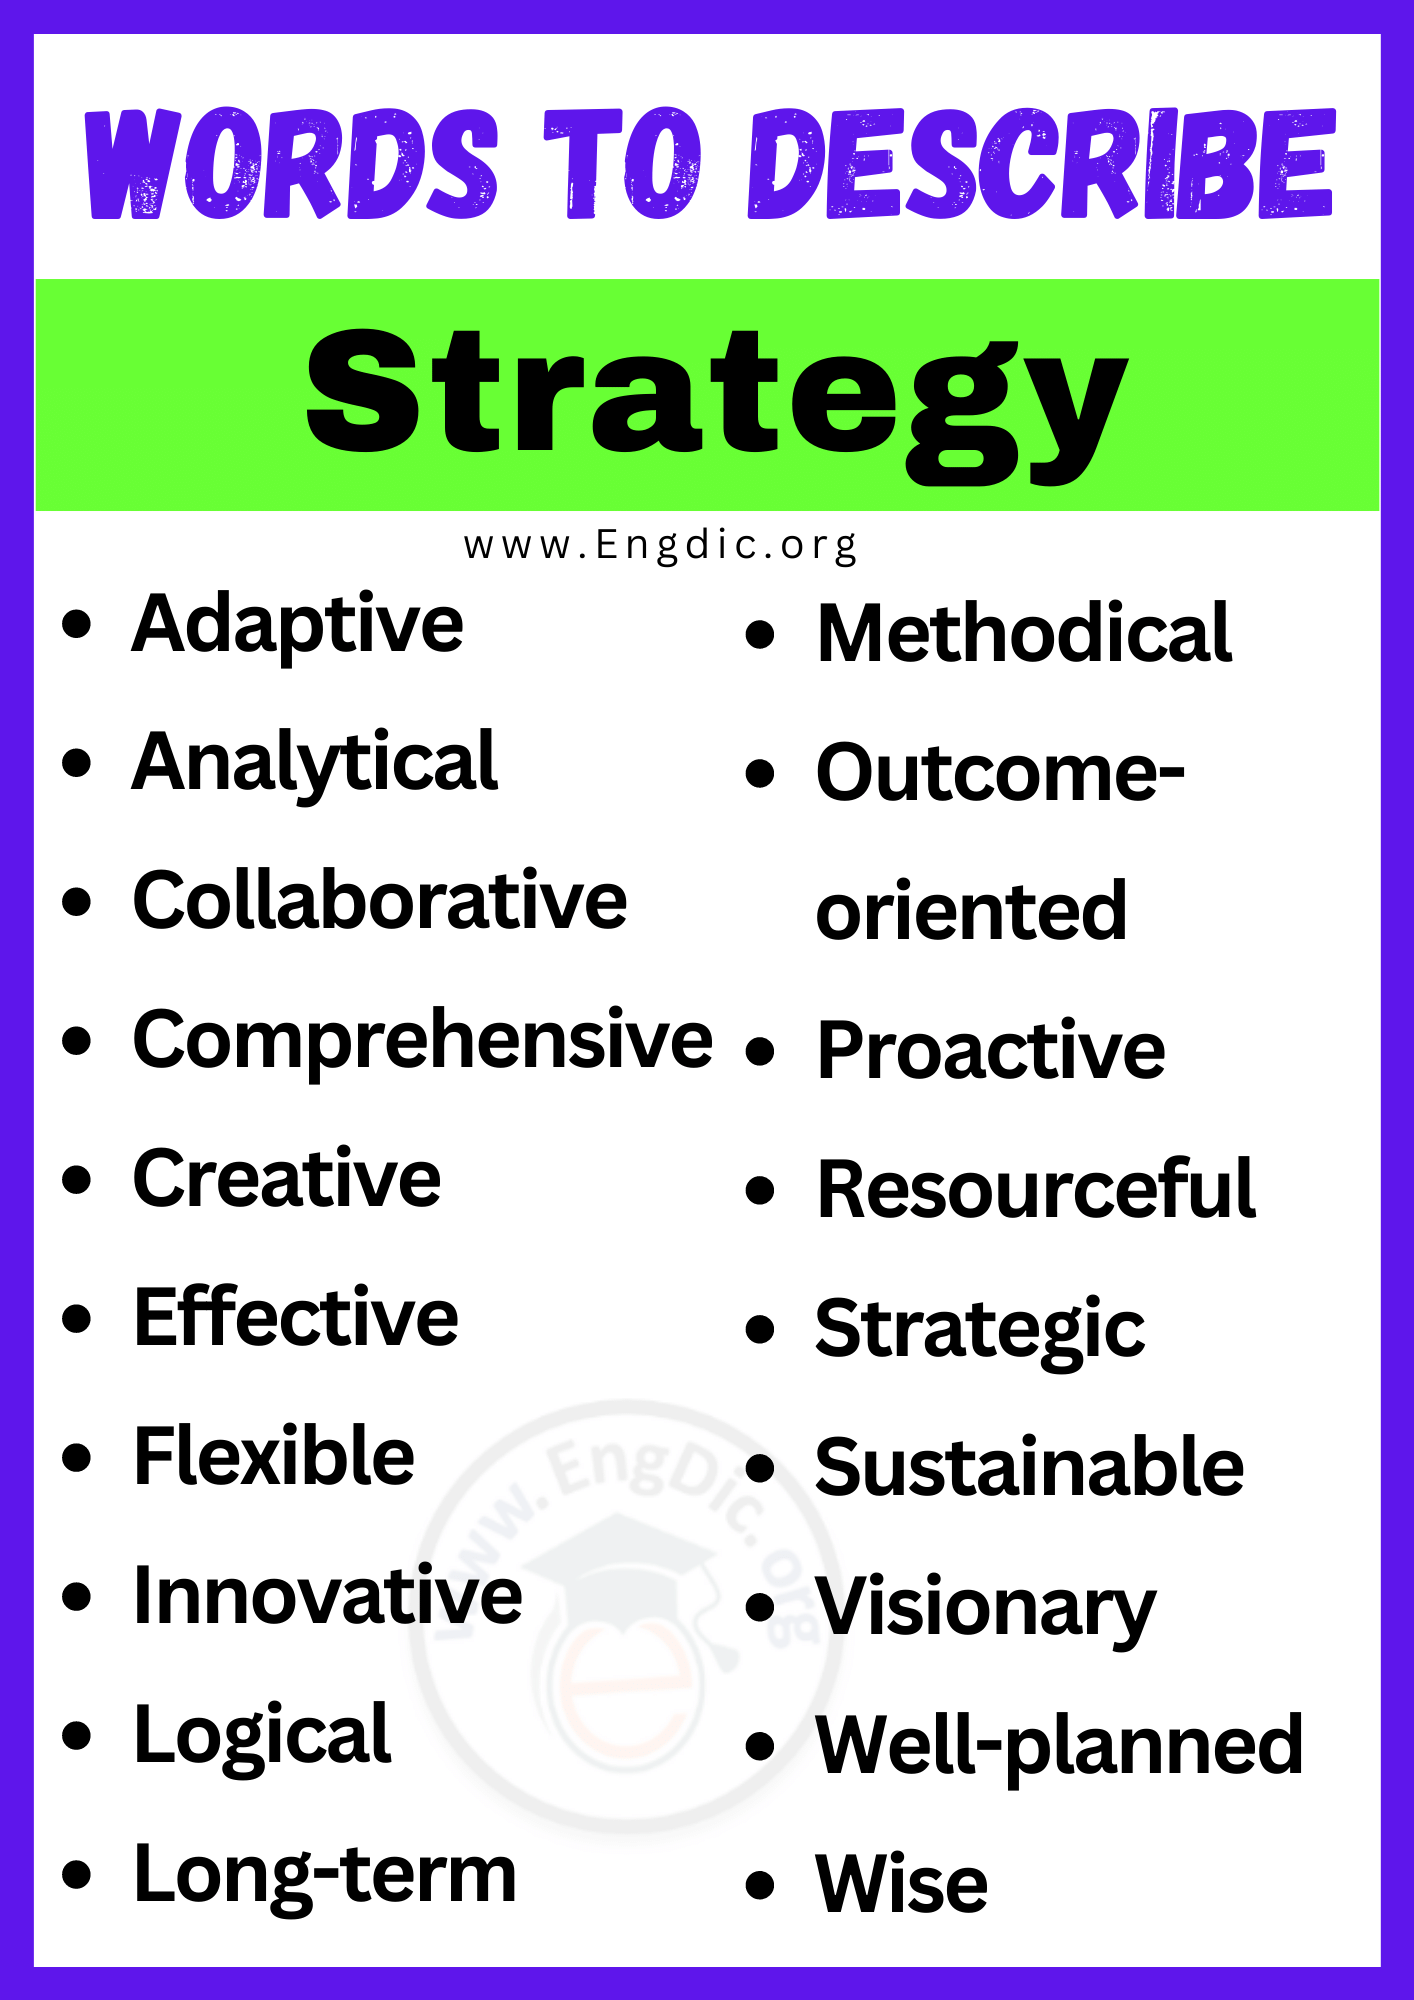 Words to Describe Strategy